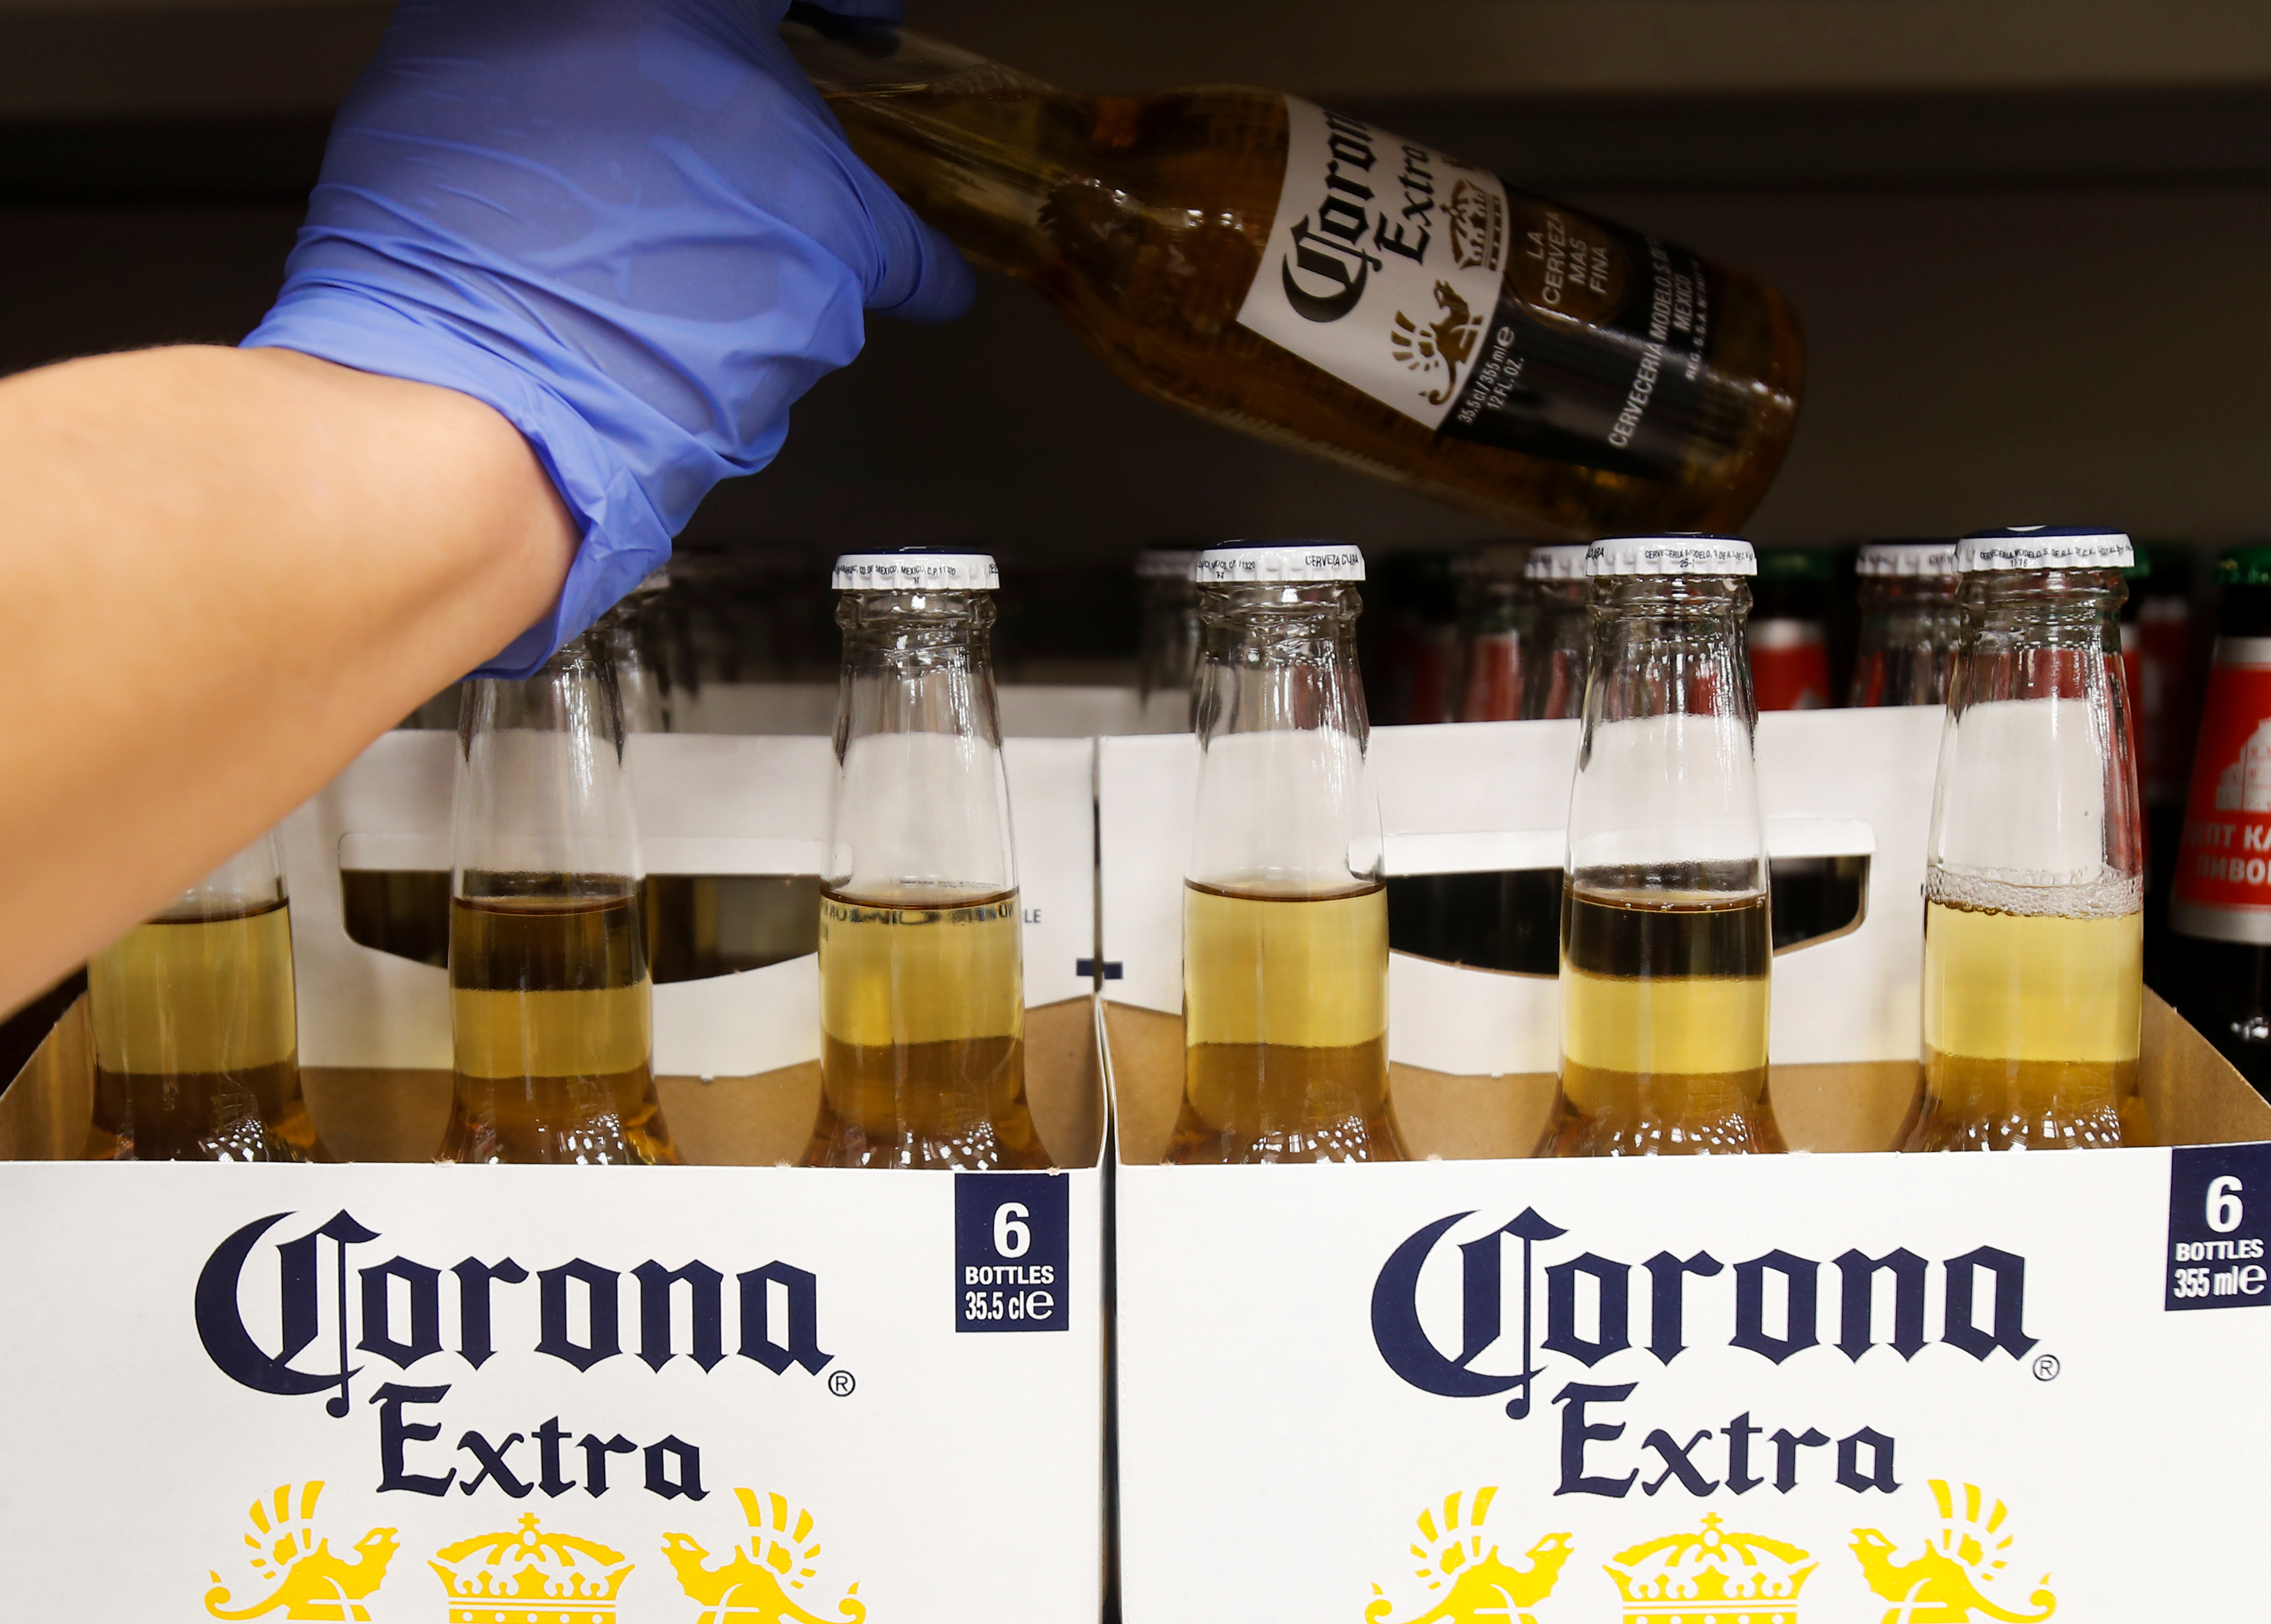 Bottles of Corona Extra beer are displayed for sale in a supermarket amid the coronavirus disease (COVID-19) pandemic in Moscow, Russia April 8, 2020. REUTERS/Maxim Shemetov